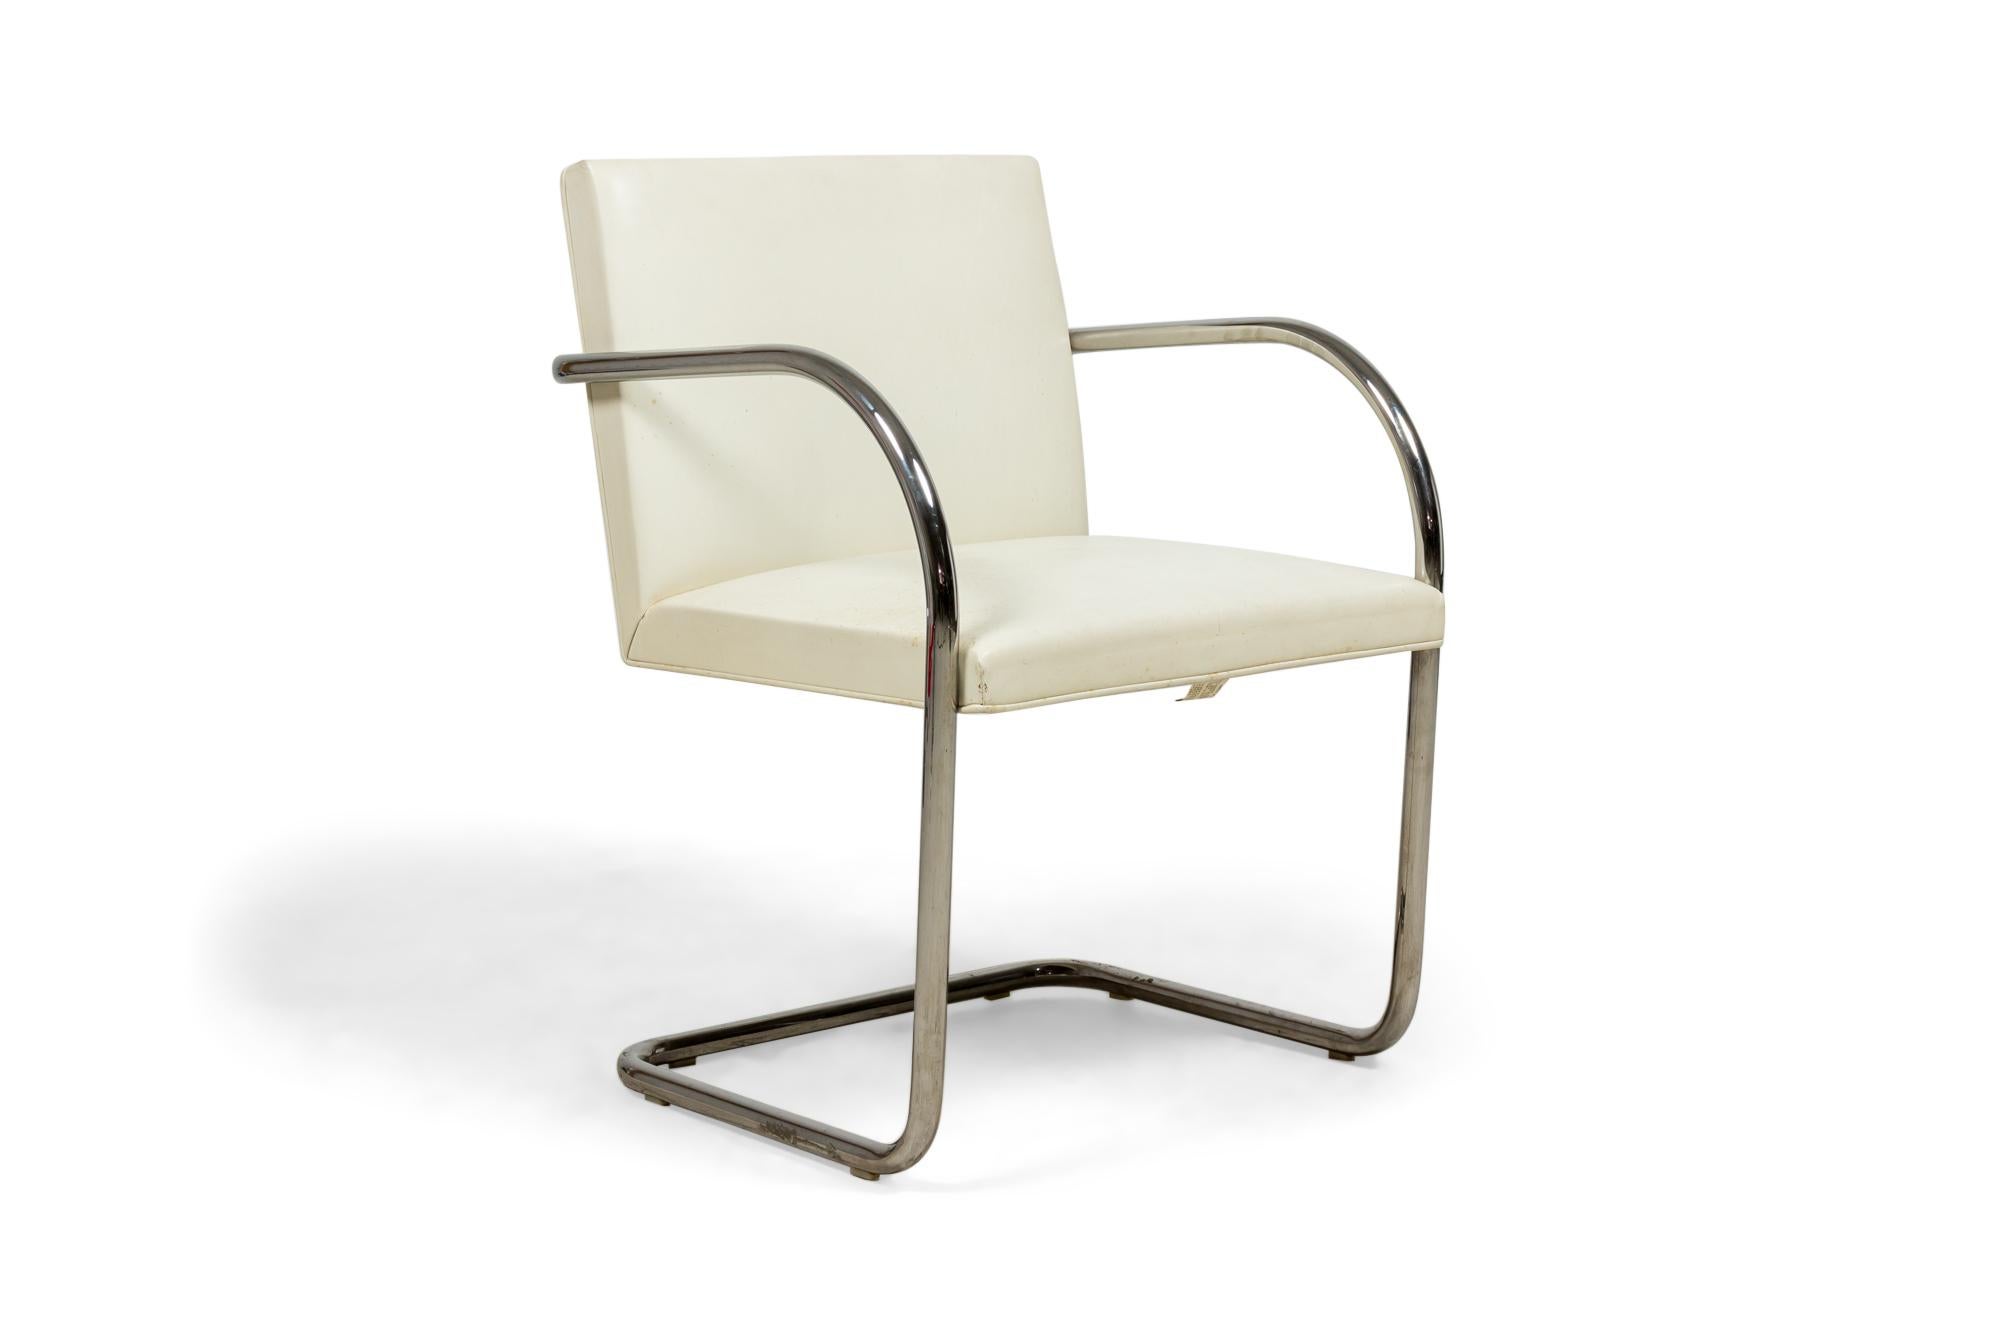 Pair of American Mid-Century 'Brno' armchairs with chrome tube frames and white leather upholstery. (Mies Van Der Rohe for Knoll International)(Priced as Pair).